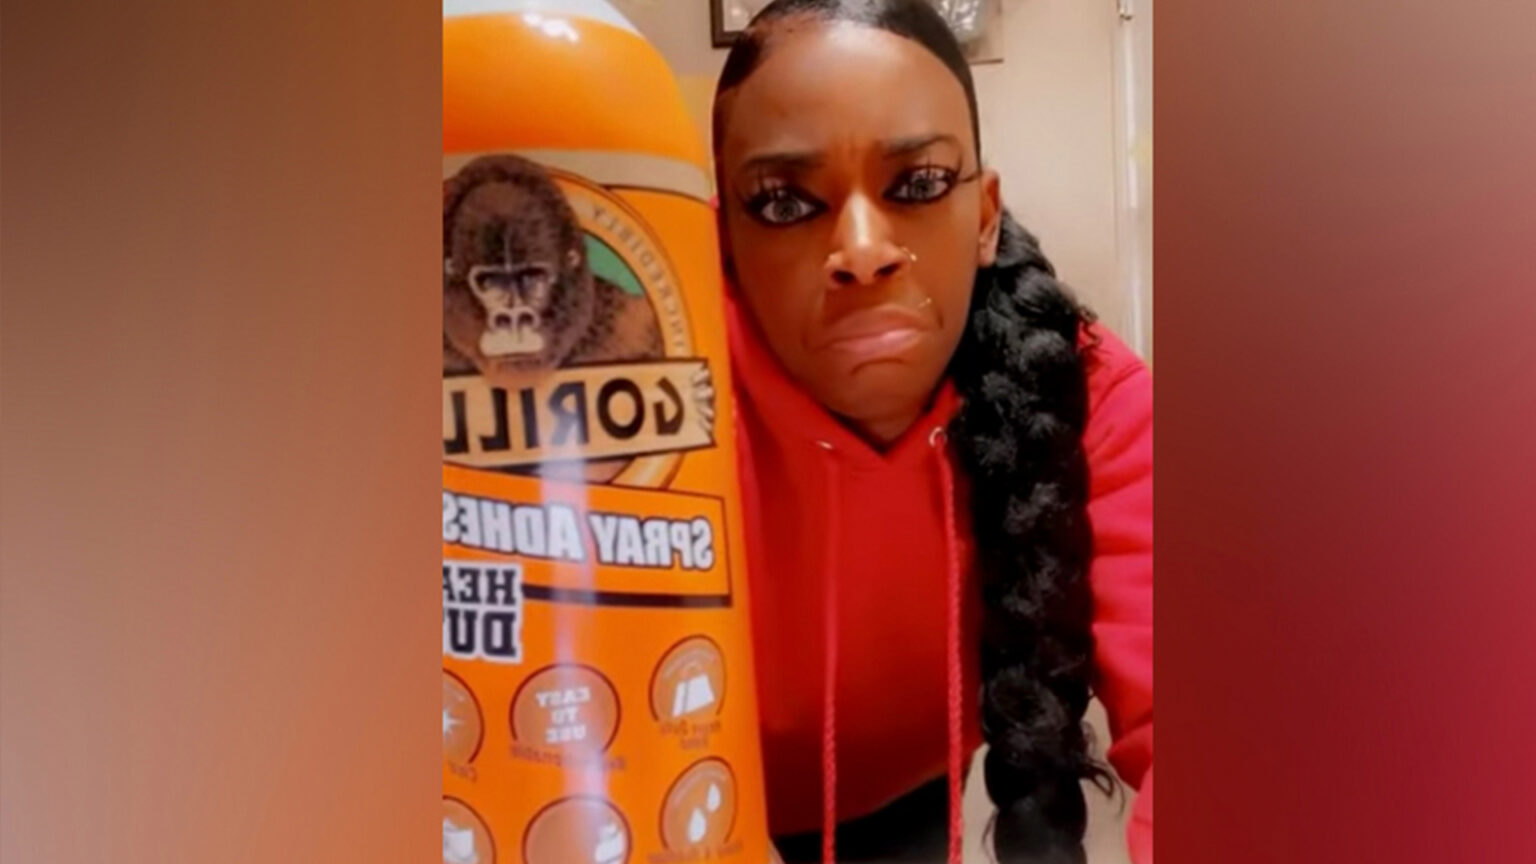 Tessica Brown had one unfortunate morning and within a month, became the internet's next meme: the Gorilla Glue woman. Hear her side of the meme.